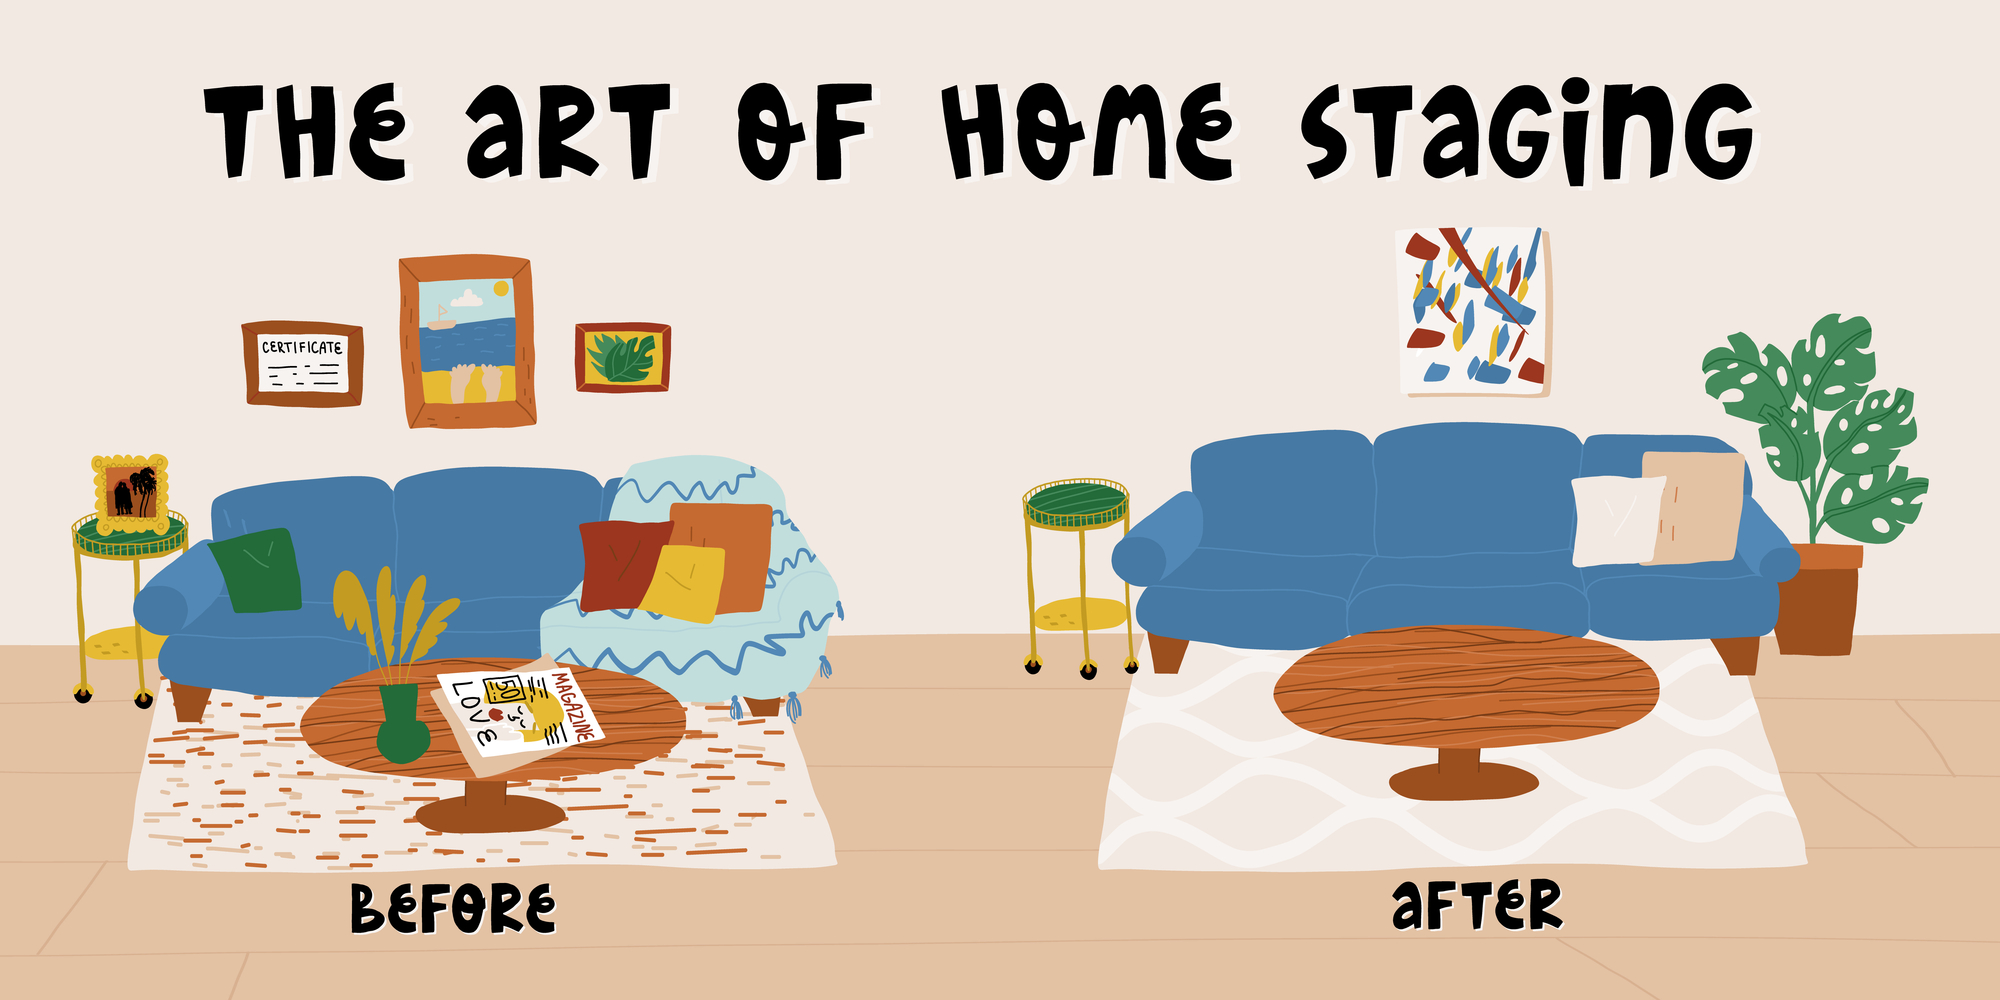 The art of home staging